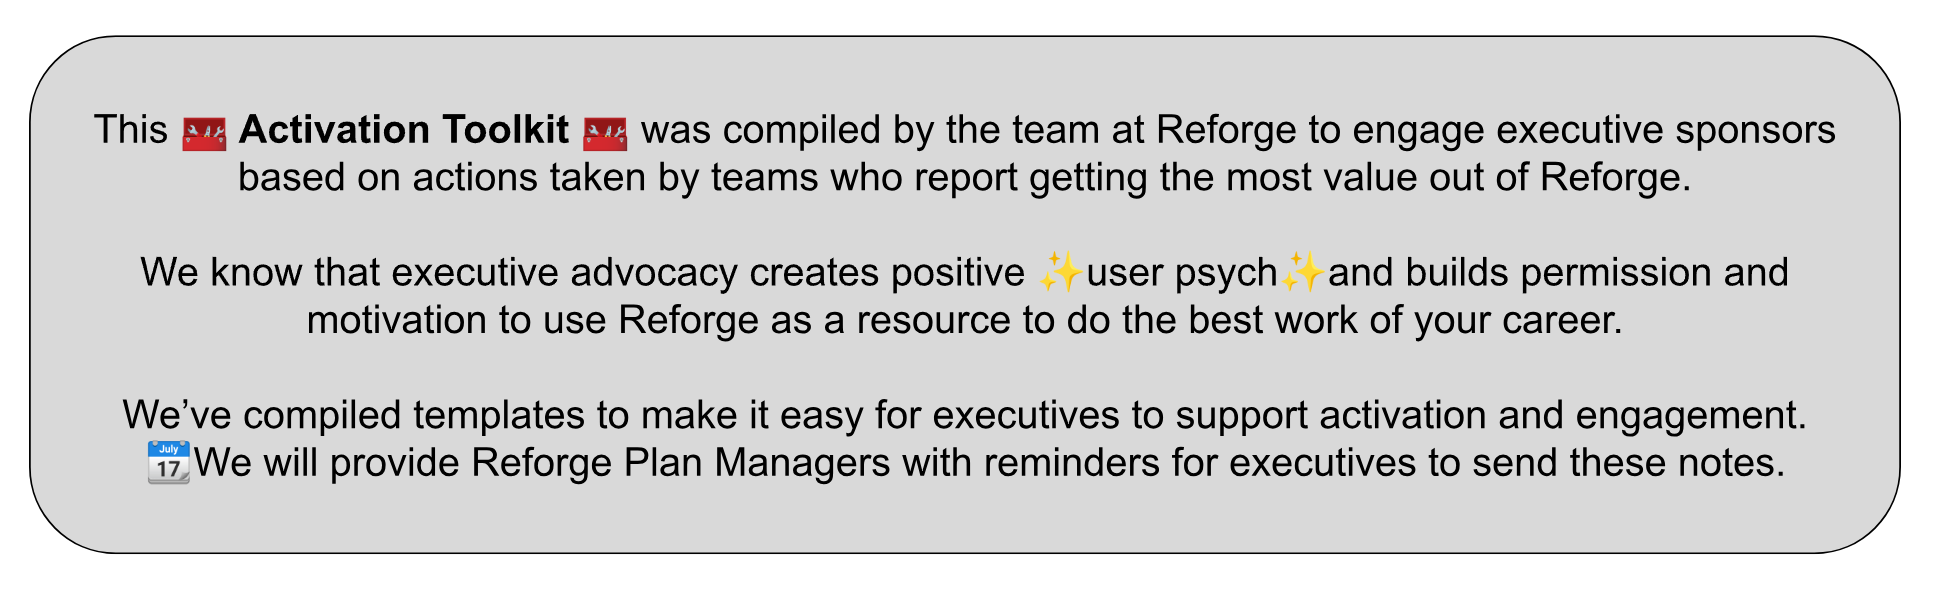 Executive_Sponsor_Toolkit_to_Support_Activation_at_Reforge_1